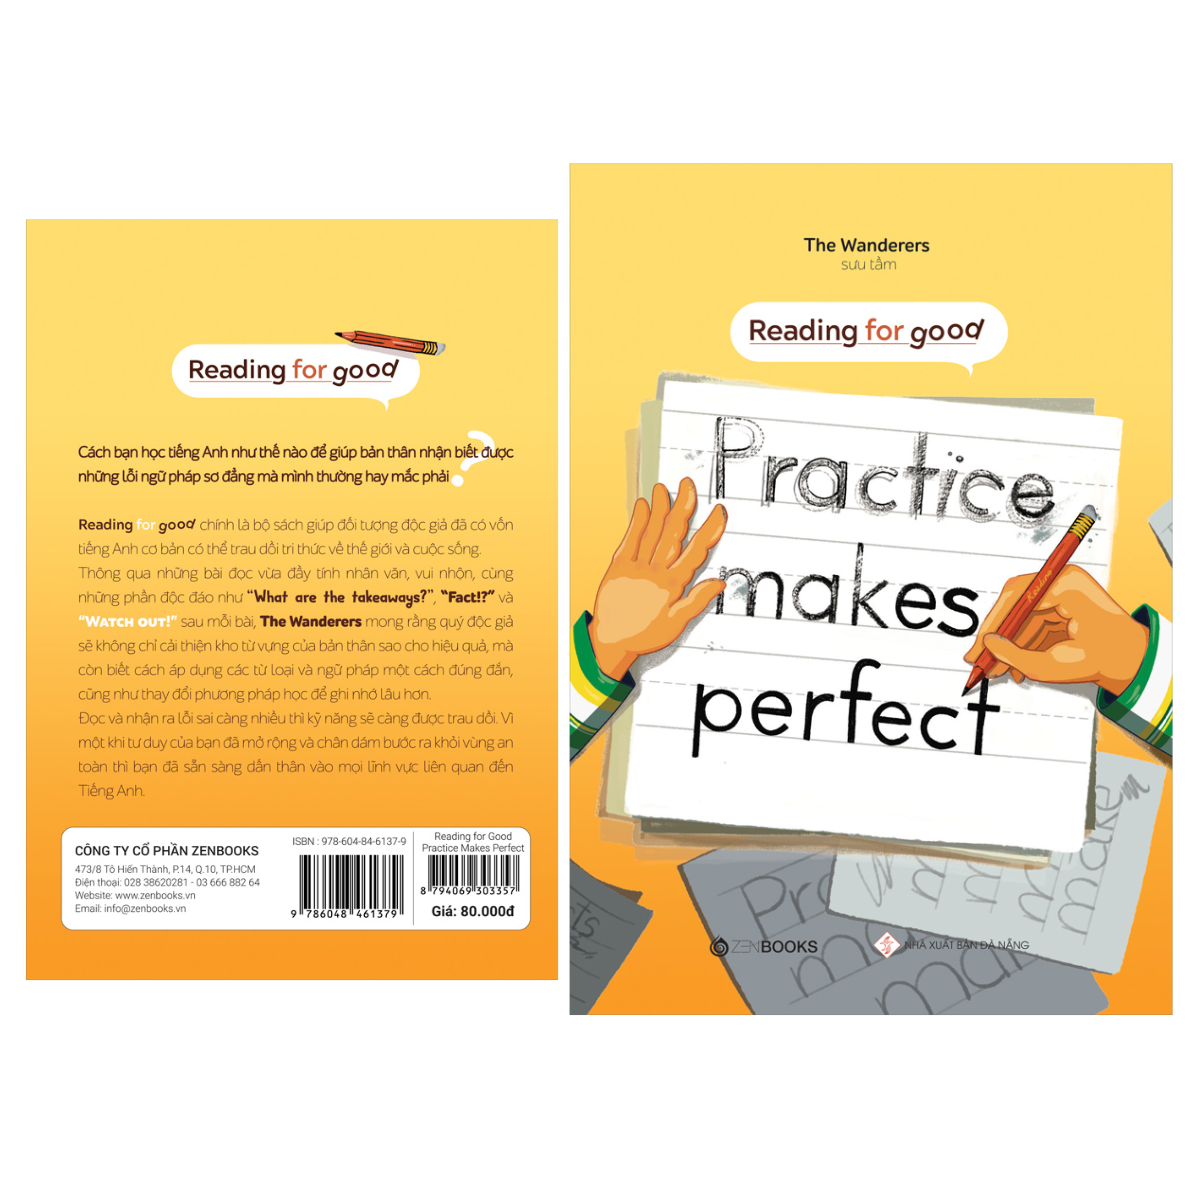 Practice Makes Perfect - Reading For Good